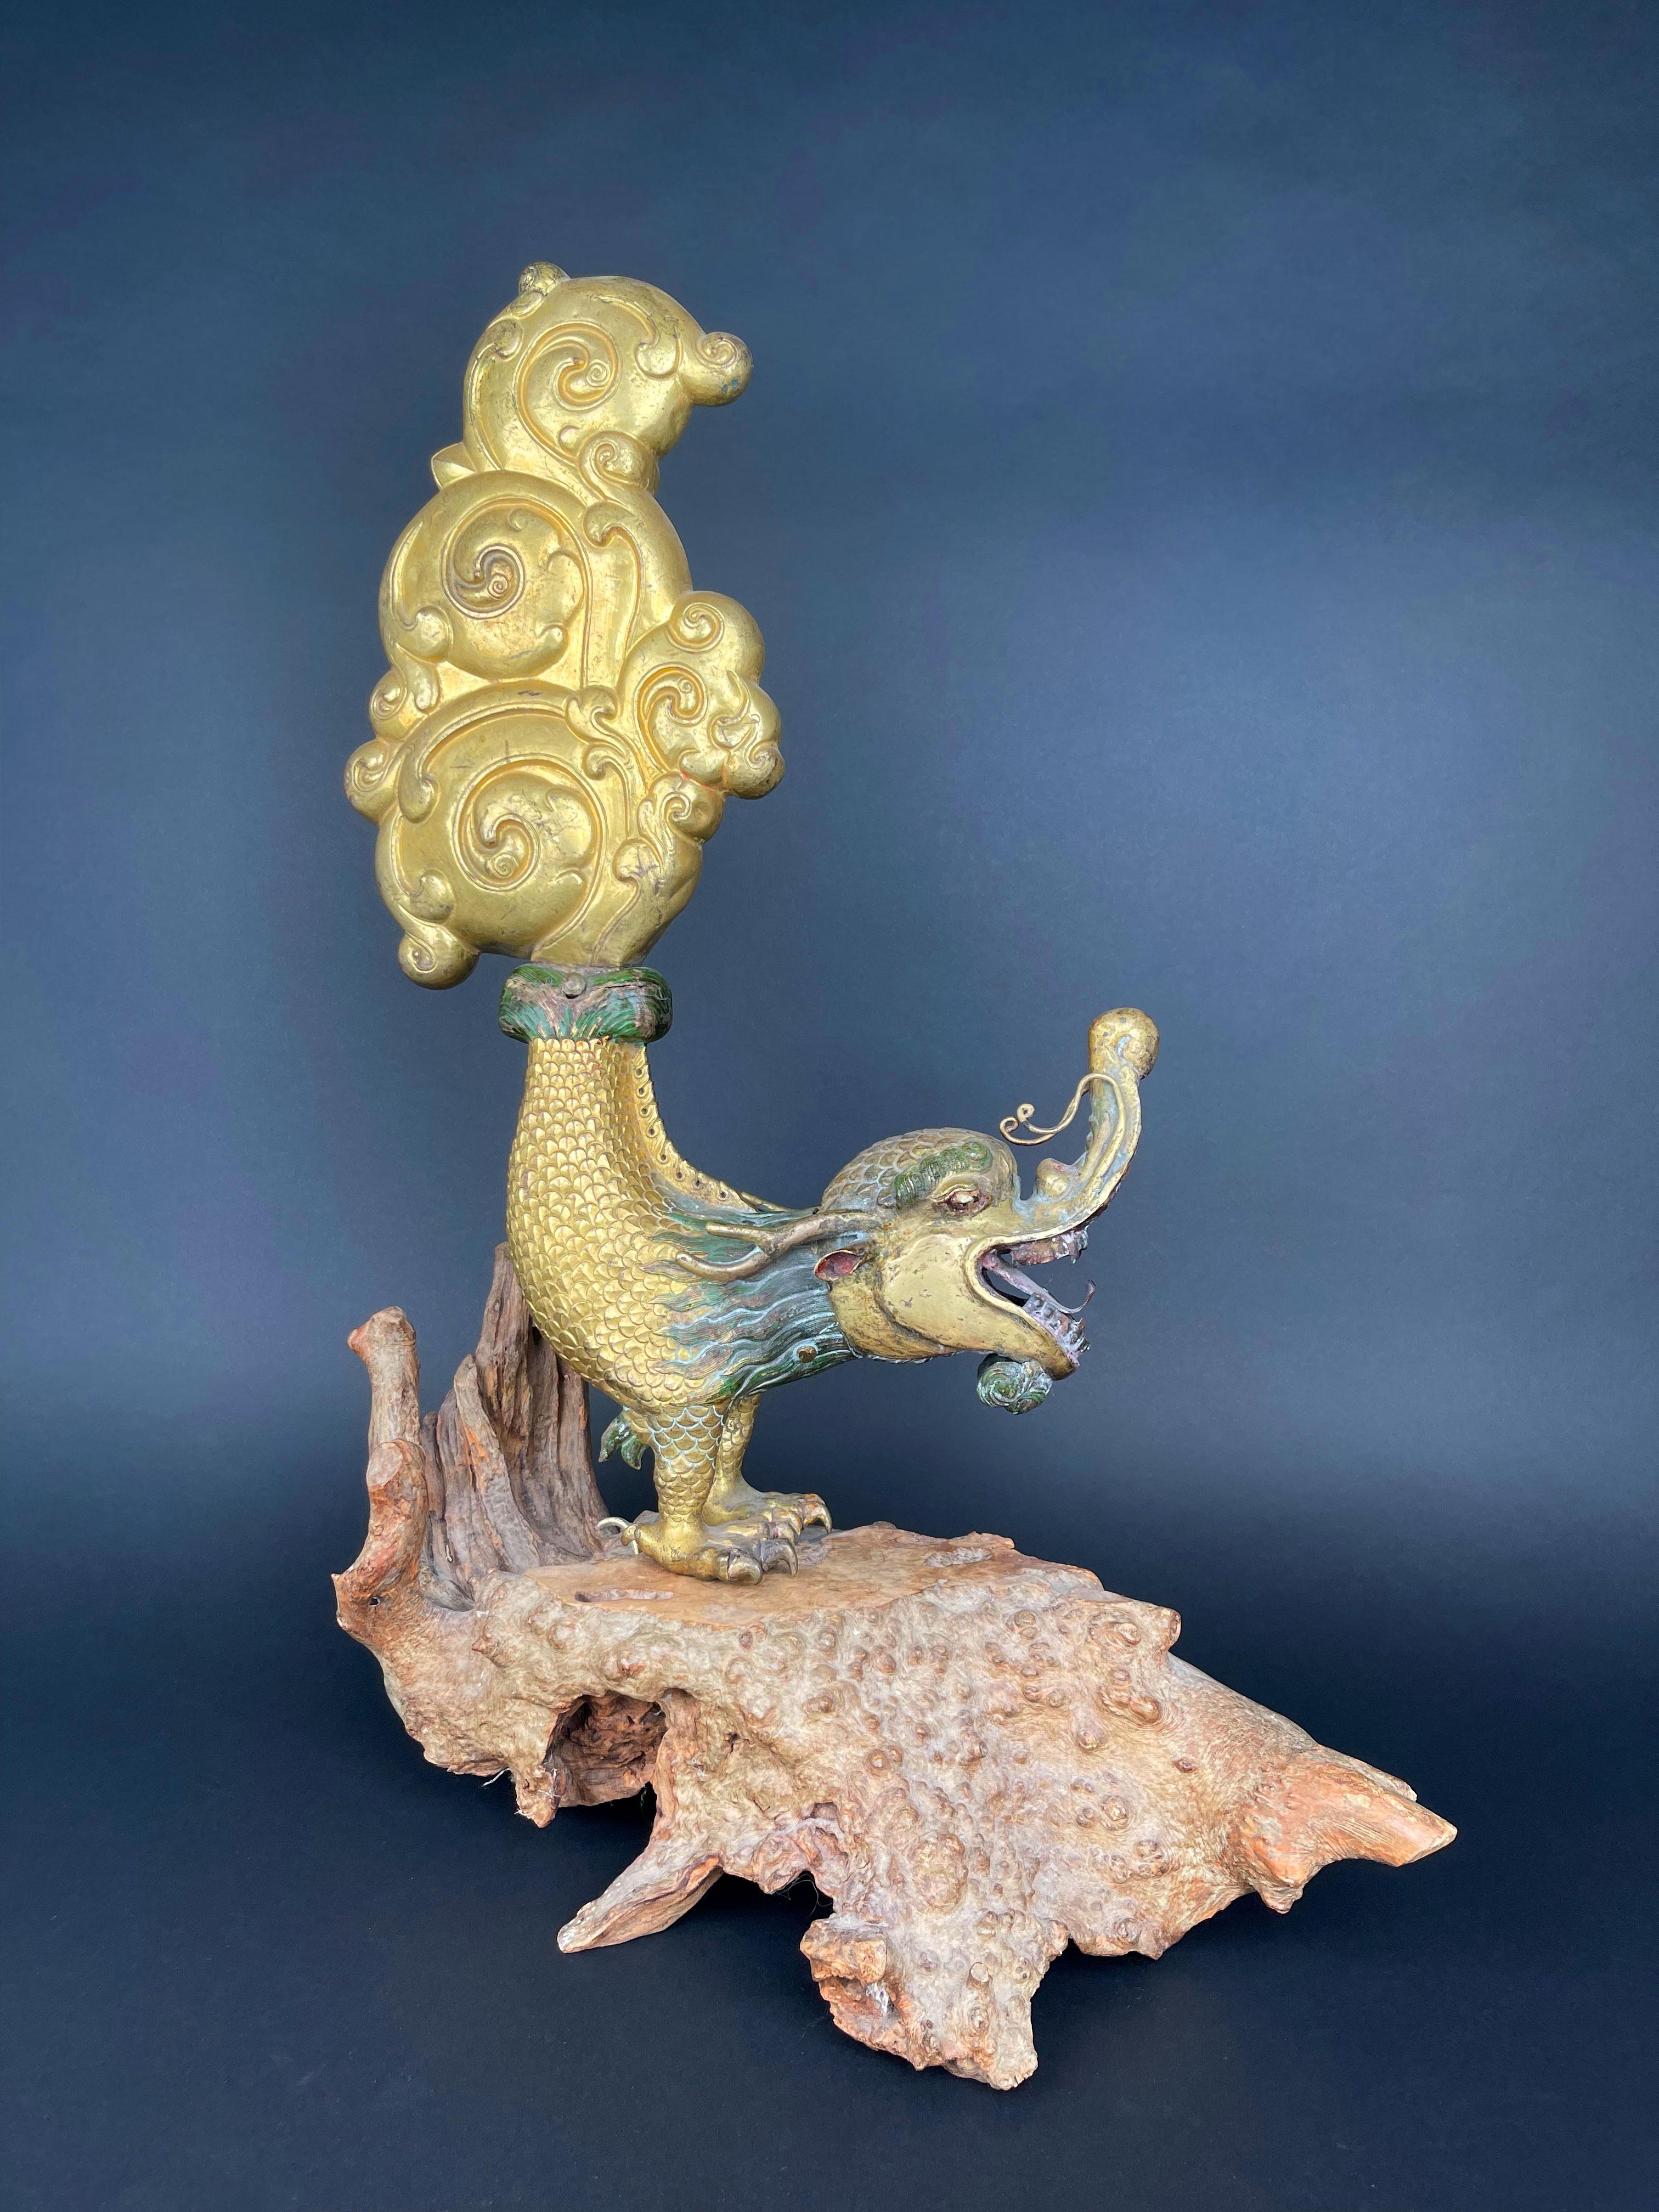 A Large Gilt Bronze Makara Finials, The mythical creature with crocodile body elaborately cast with gaping mouth and coiled trunk, its tail rising up in a finely detailed with rich gilding mounted on piece of wood.

 Tibet, Late 17th Early 18th